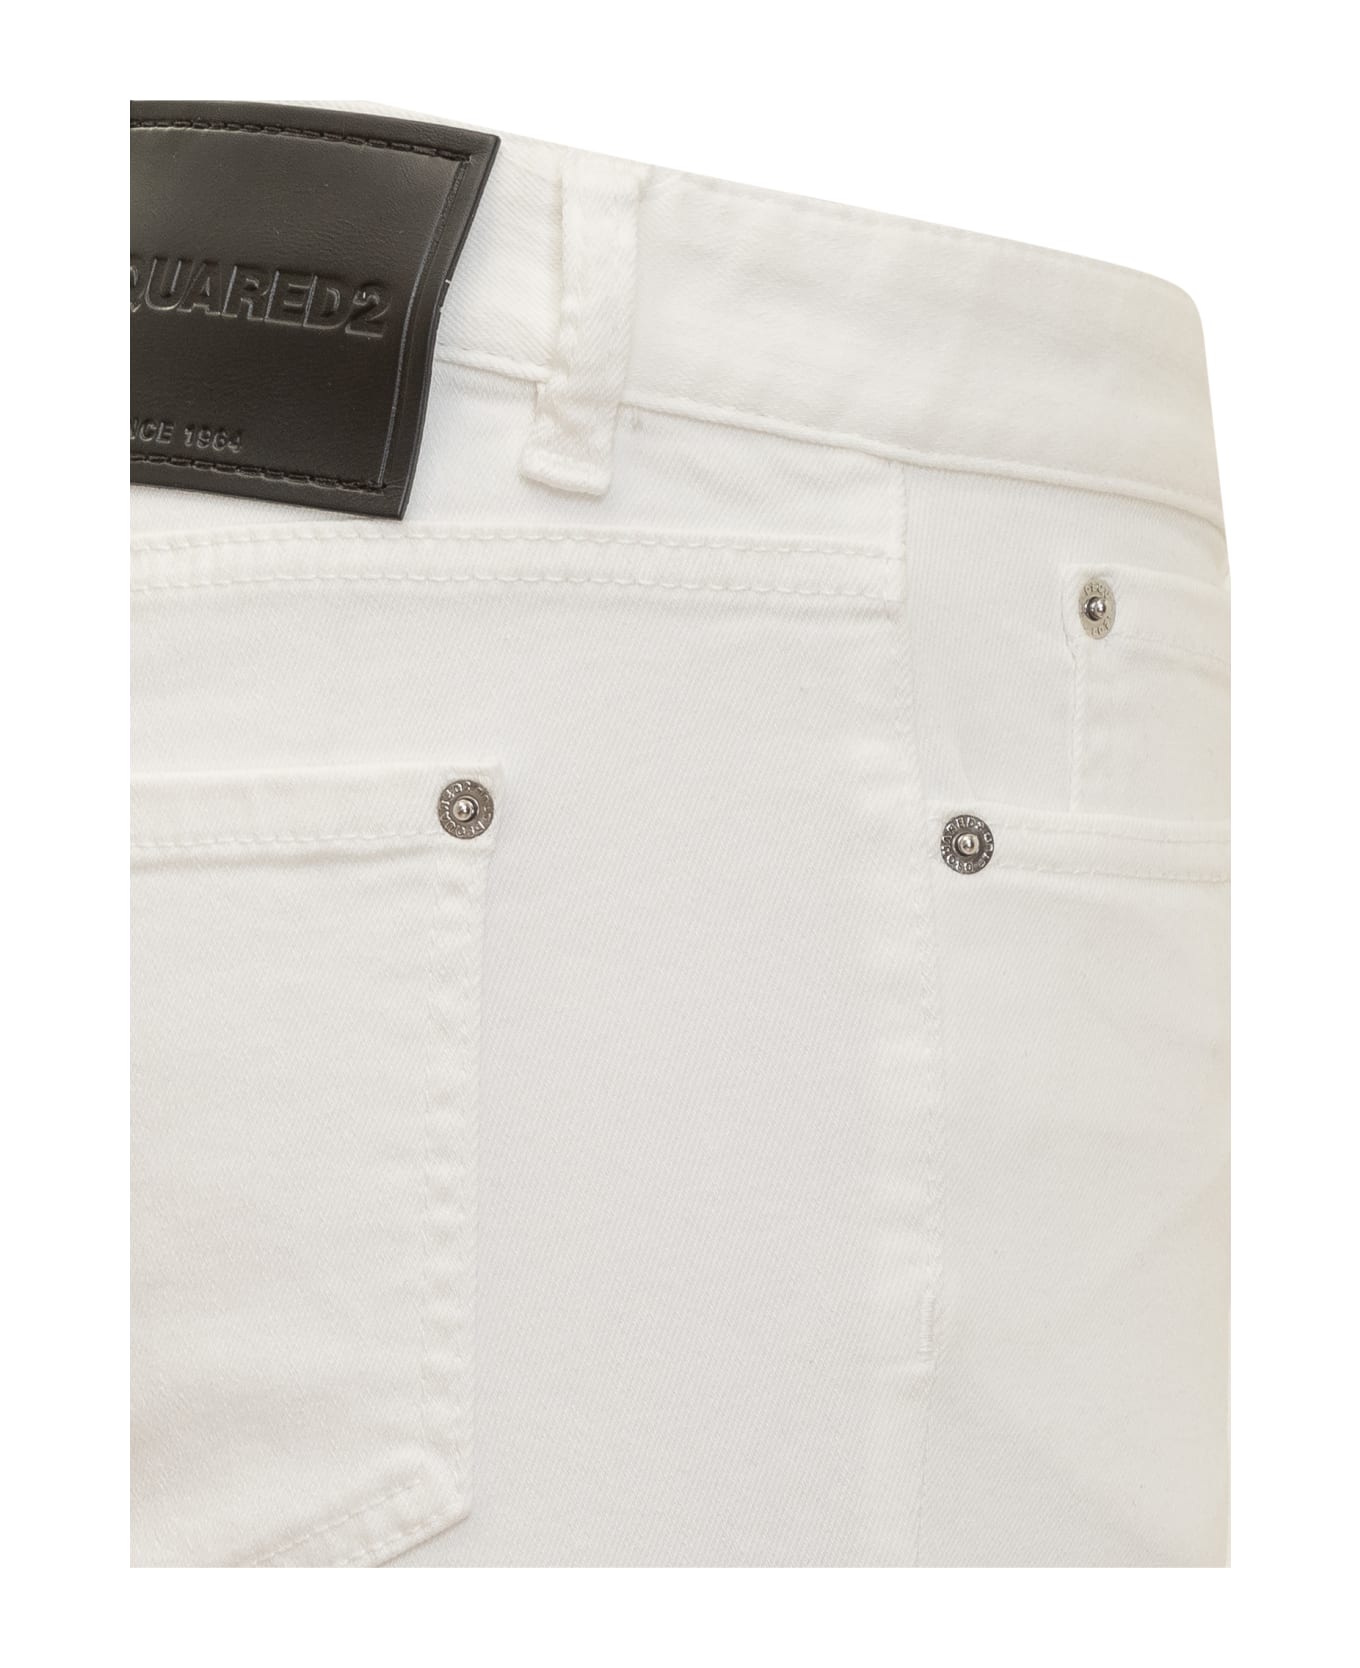 Dsquared2 Twiggy Jeans - WHITE